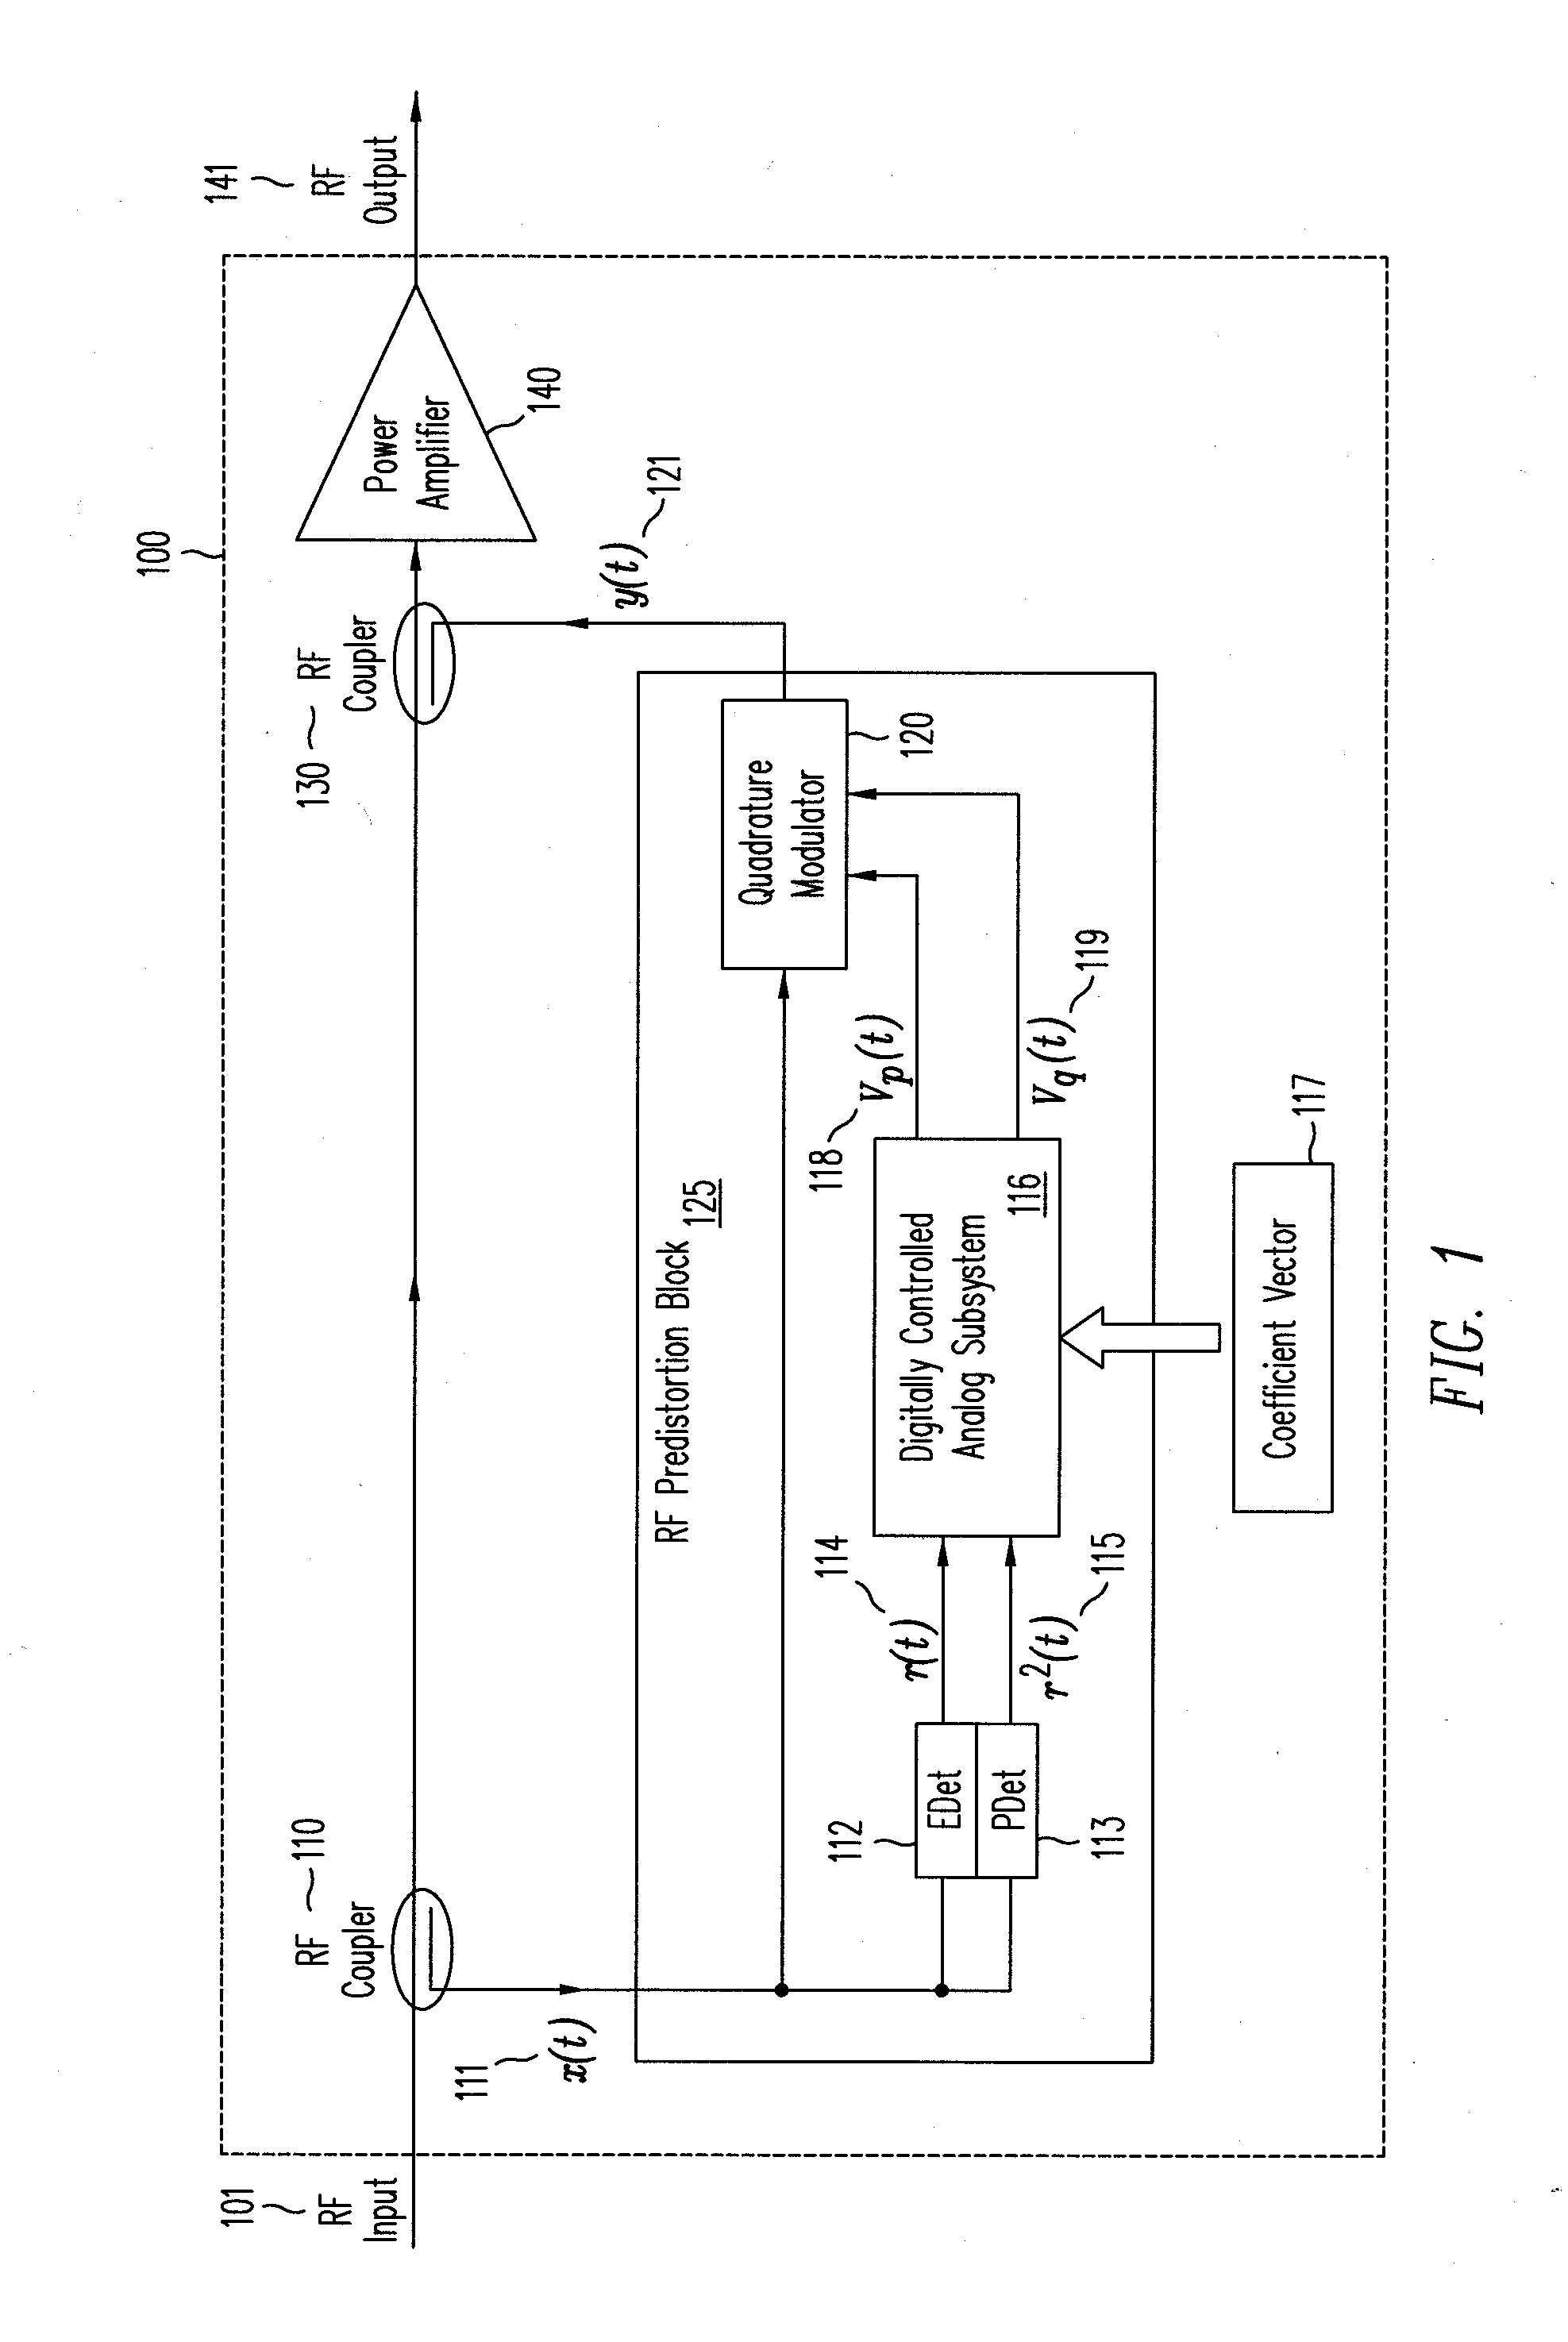 Analog signal processor for nonlinear predistortion of radio-frequency signals